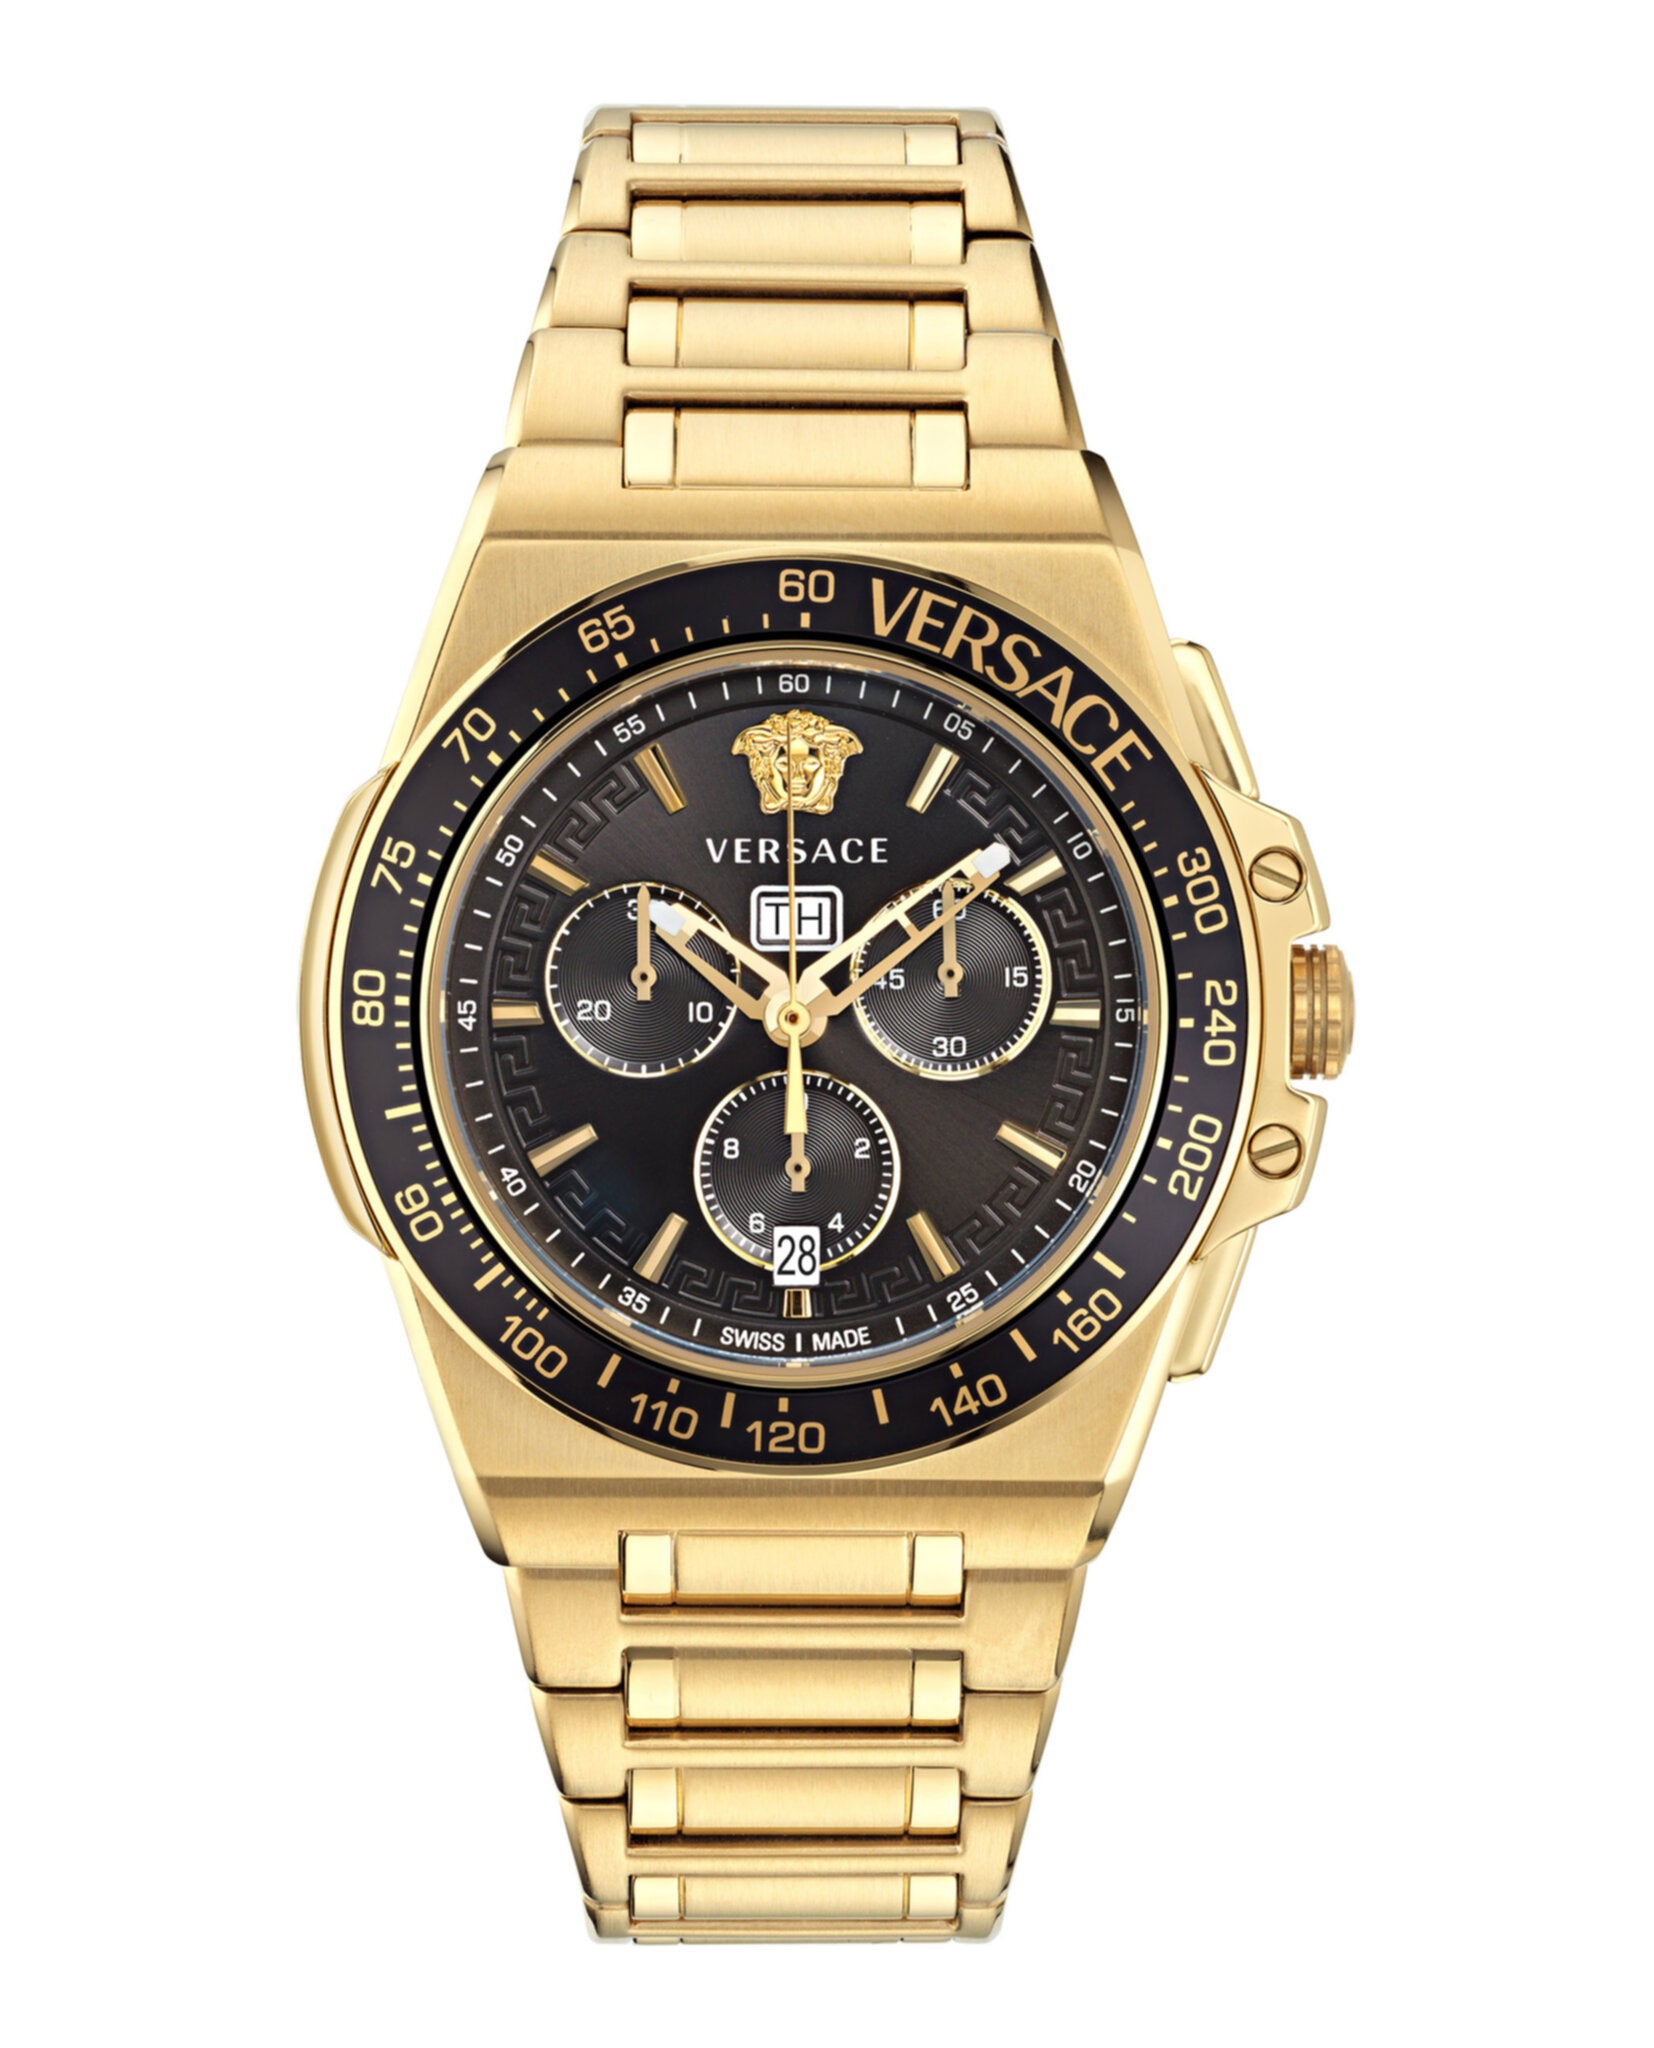 Time – MadaLuxe Time Extreme | Versace Mens Greca Madaluxe Chrono Watches